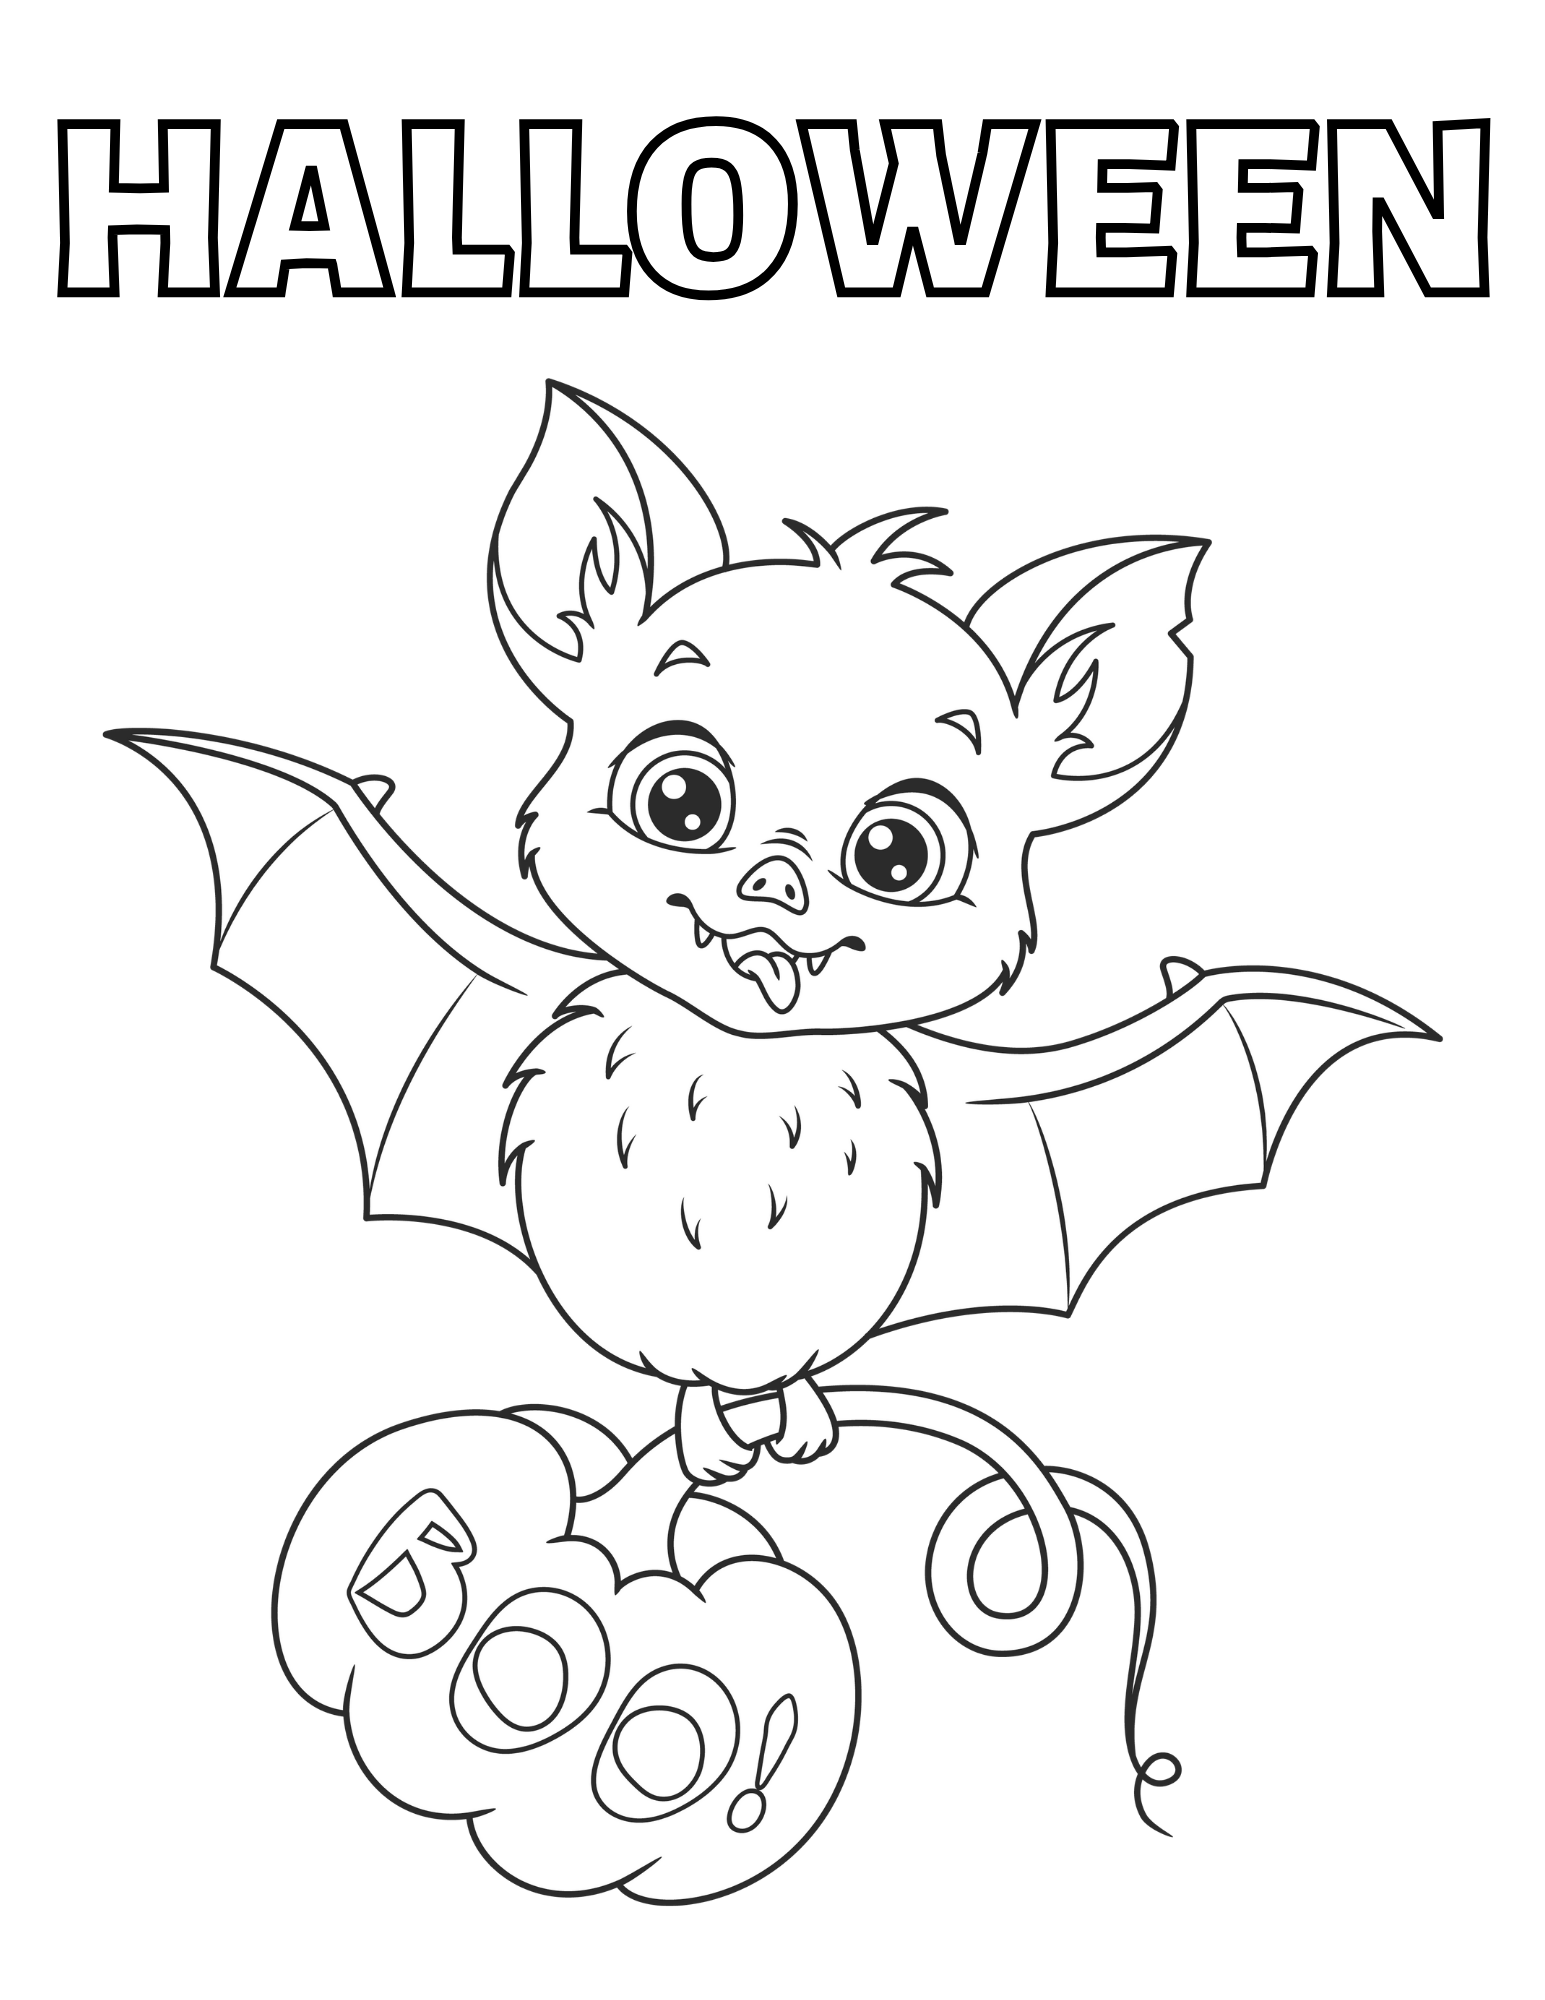 Bat themed free halloween coloring pages printable â